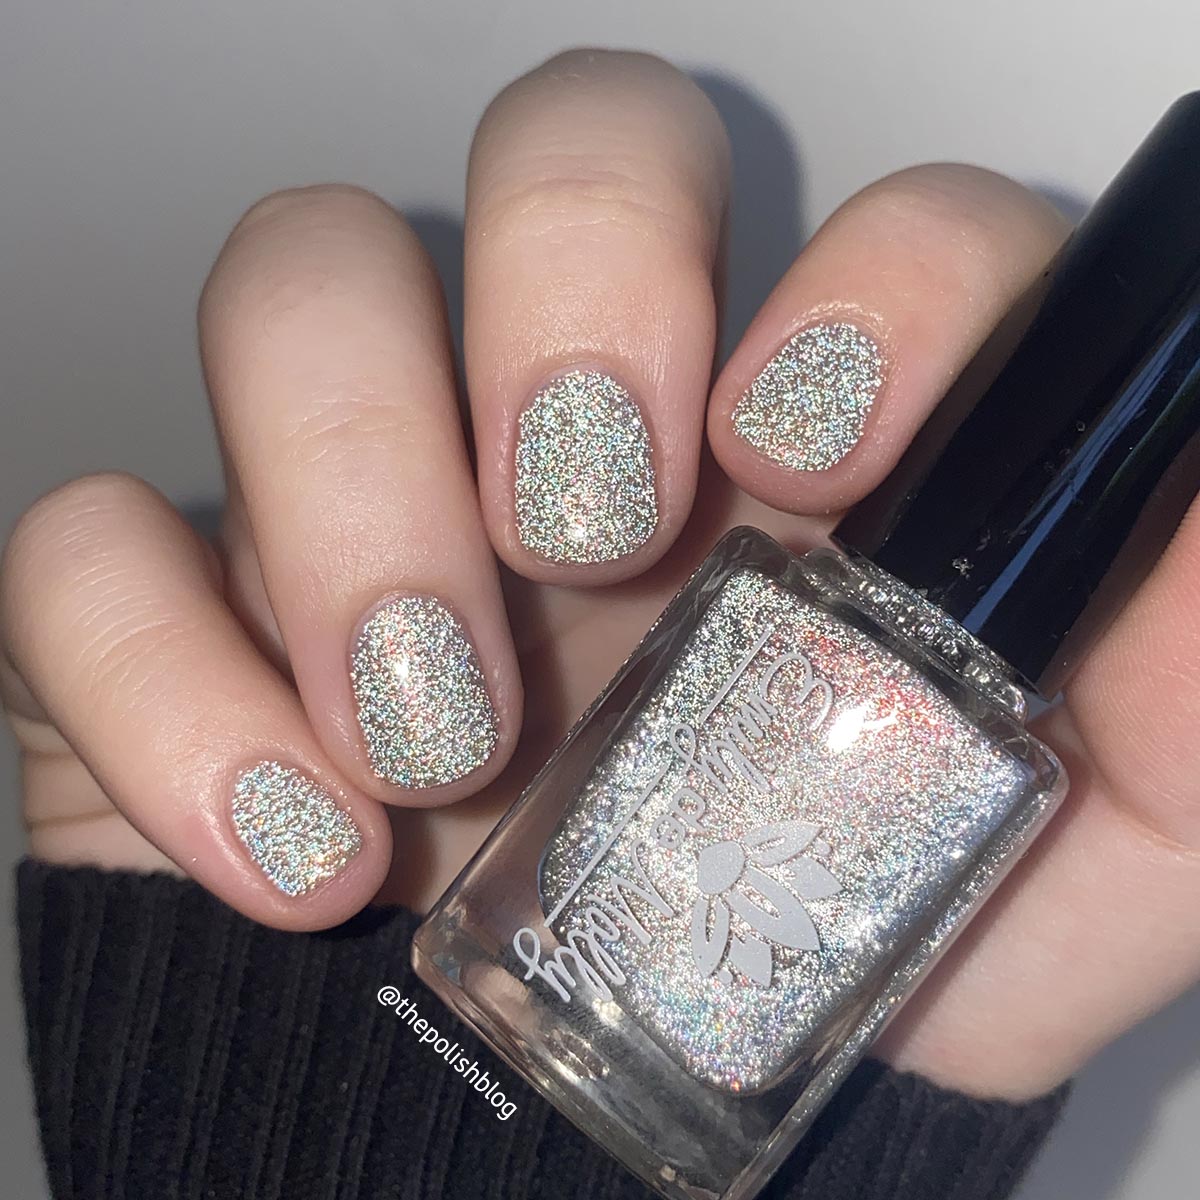 Nails of the Day: Avon's Magic Effects Diamond Shatter & OPI Samoan Sands